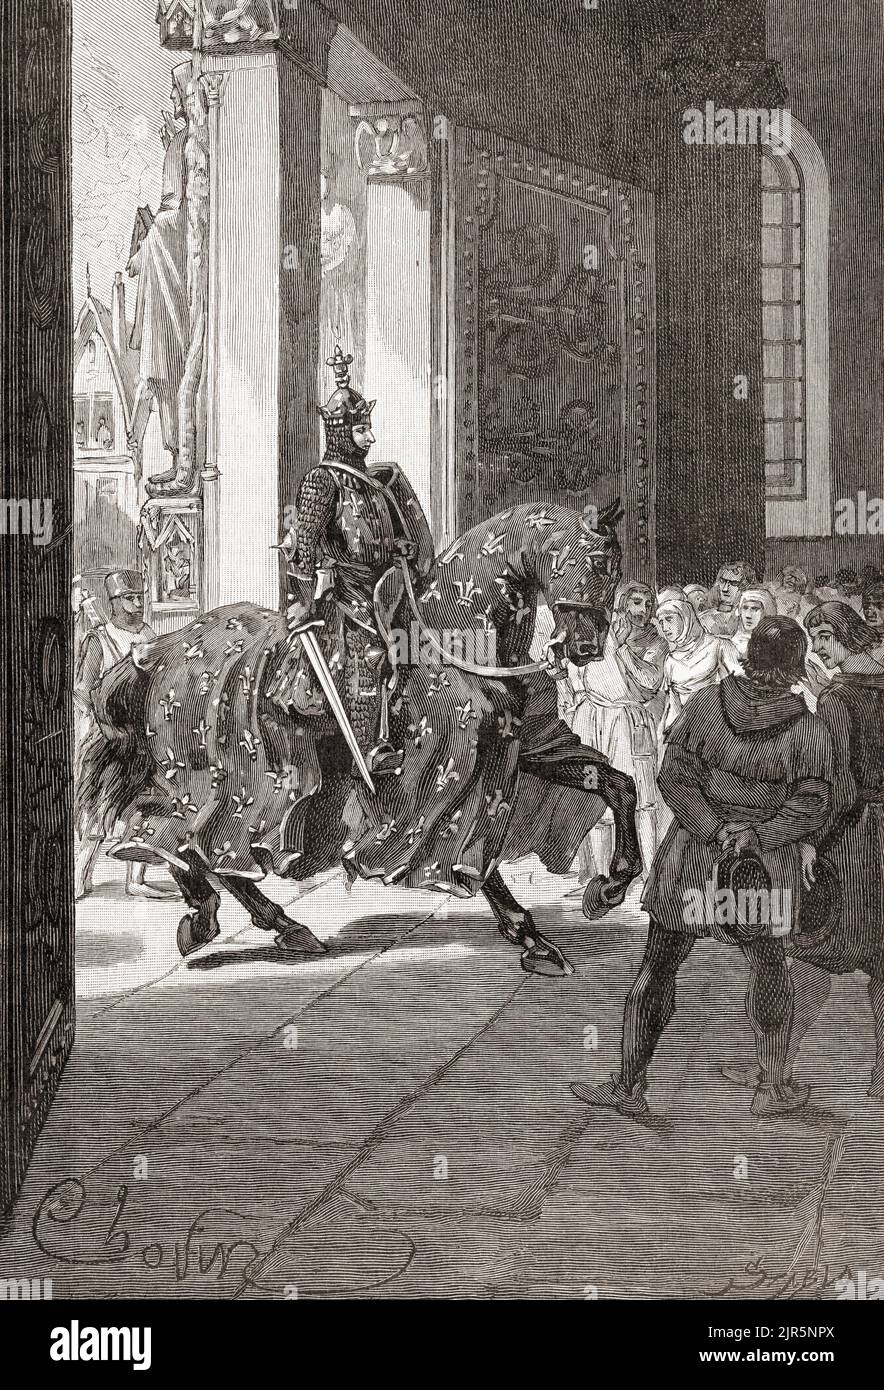 Philip IV of France enters Notre Dame on horseback to thank God for having escaped during the Battle of the Golden Spurs against the Flemish in 1302.  Philip was victorious in the overall Franco-Flemish War and donated his equestrian effigy to Notre Dame.  Philip IV, 1268 – 1314, called Philip the Fair.  King of France, 1285 - 1314 and King of Navarre as Philip I through his marriage to Joan I of Navarre.  From Histoire de France, published 1855. Stock Photo